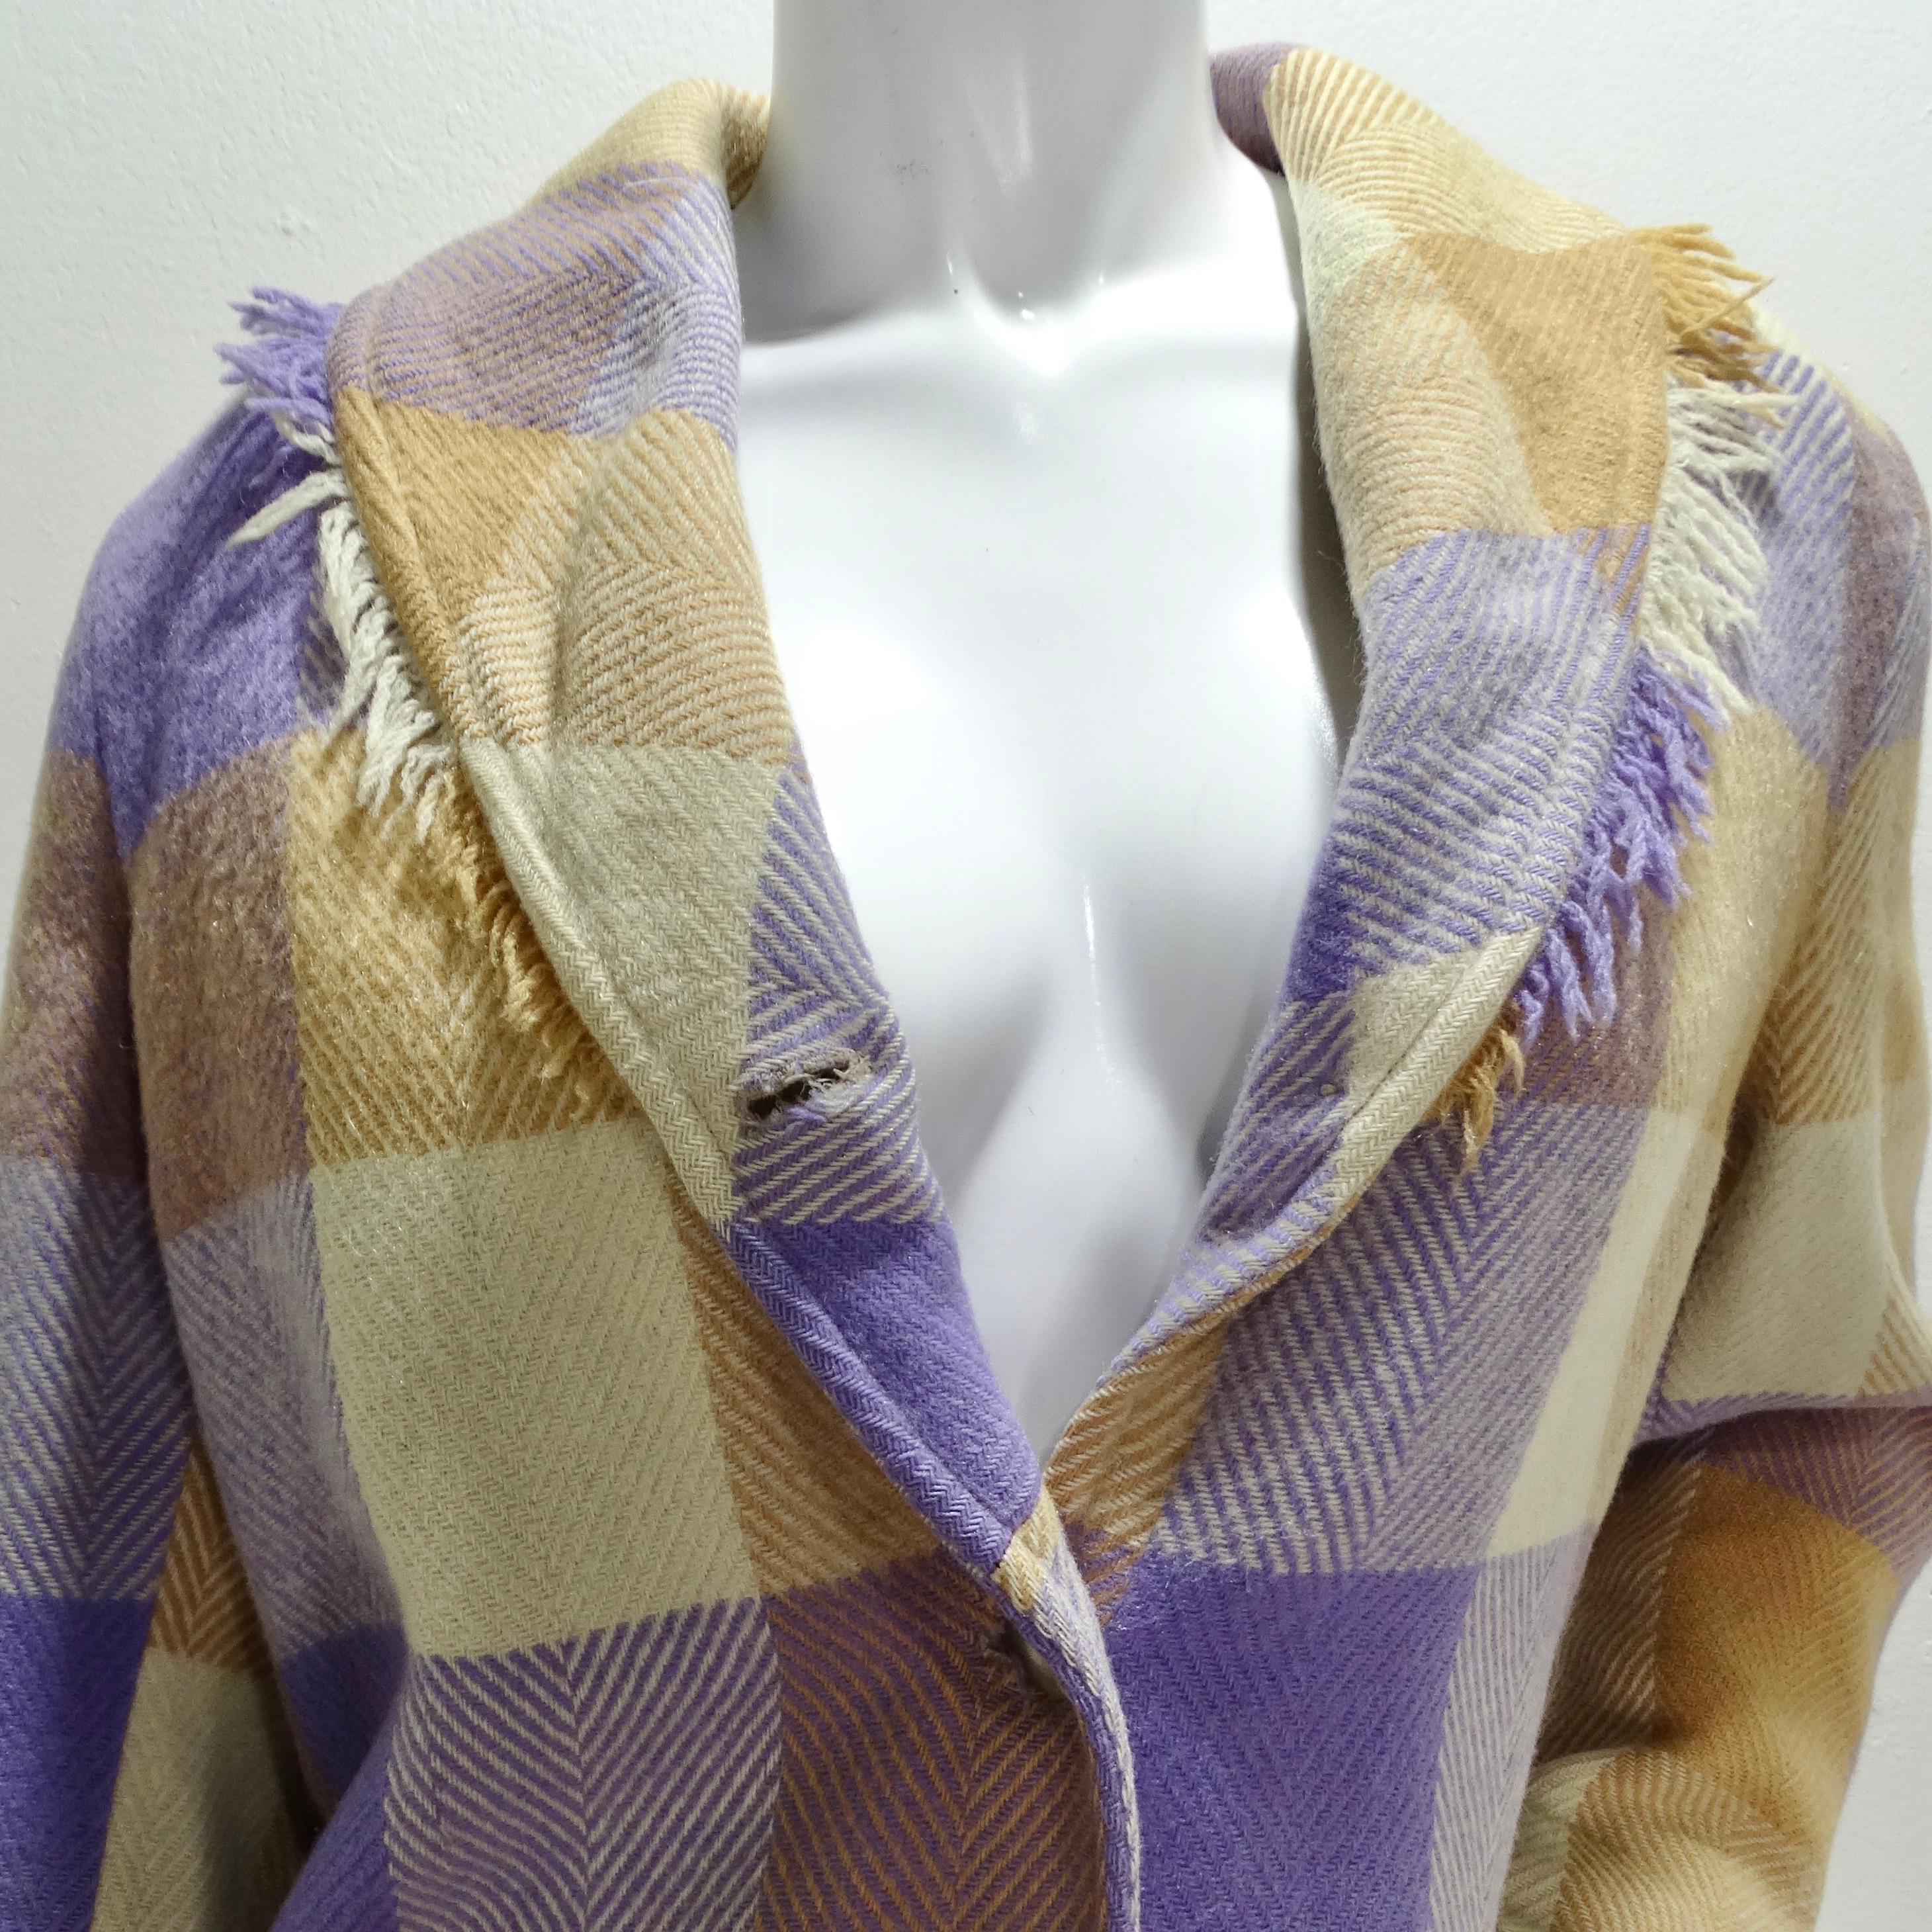 Introducing the 1970s Western Plaid Wool Blazer, a charming piece that captures the essence of 1970s western style with a modern twist. Crafted from luxurious brown and purple plaid wool, this blazer exudes warmth and coziness, making it the perfect